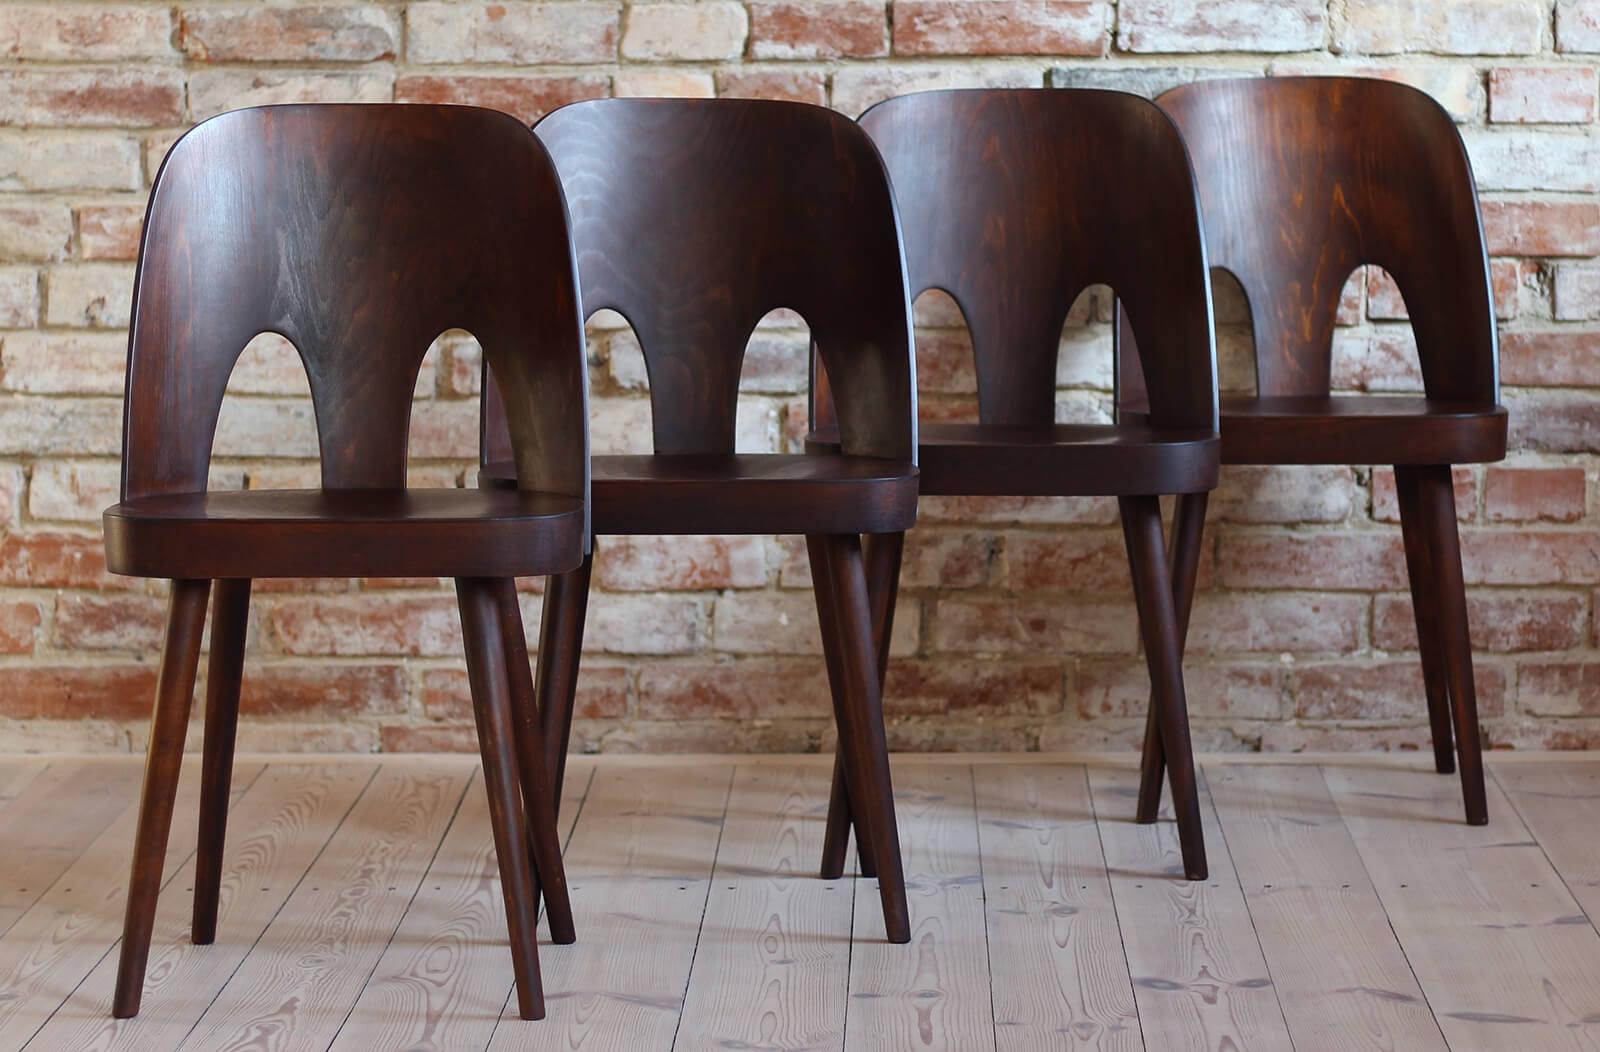 This set of four vintage dining chairs was designed by Oswald Haerdtl in the 1950s, famous Austrian designer – together with Mr. Josef Hoffmann he designed the cafe terrace at the Vienna Werkbund Exhibition of 1930, where they designed every little